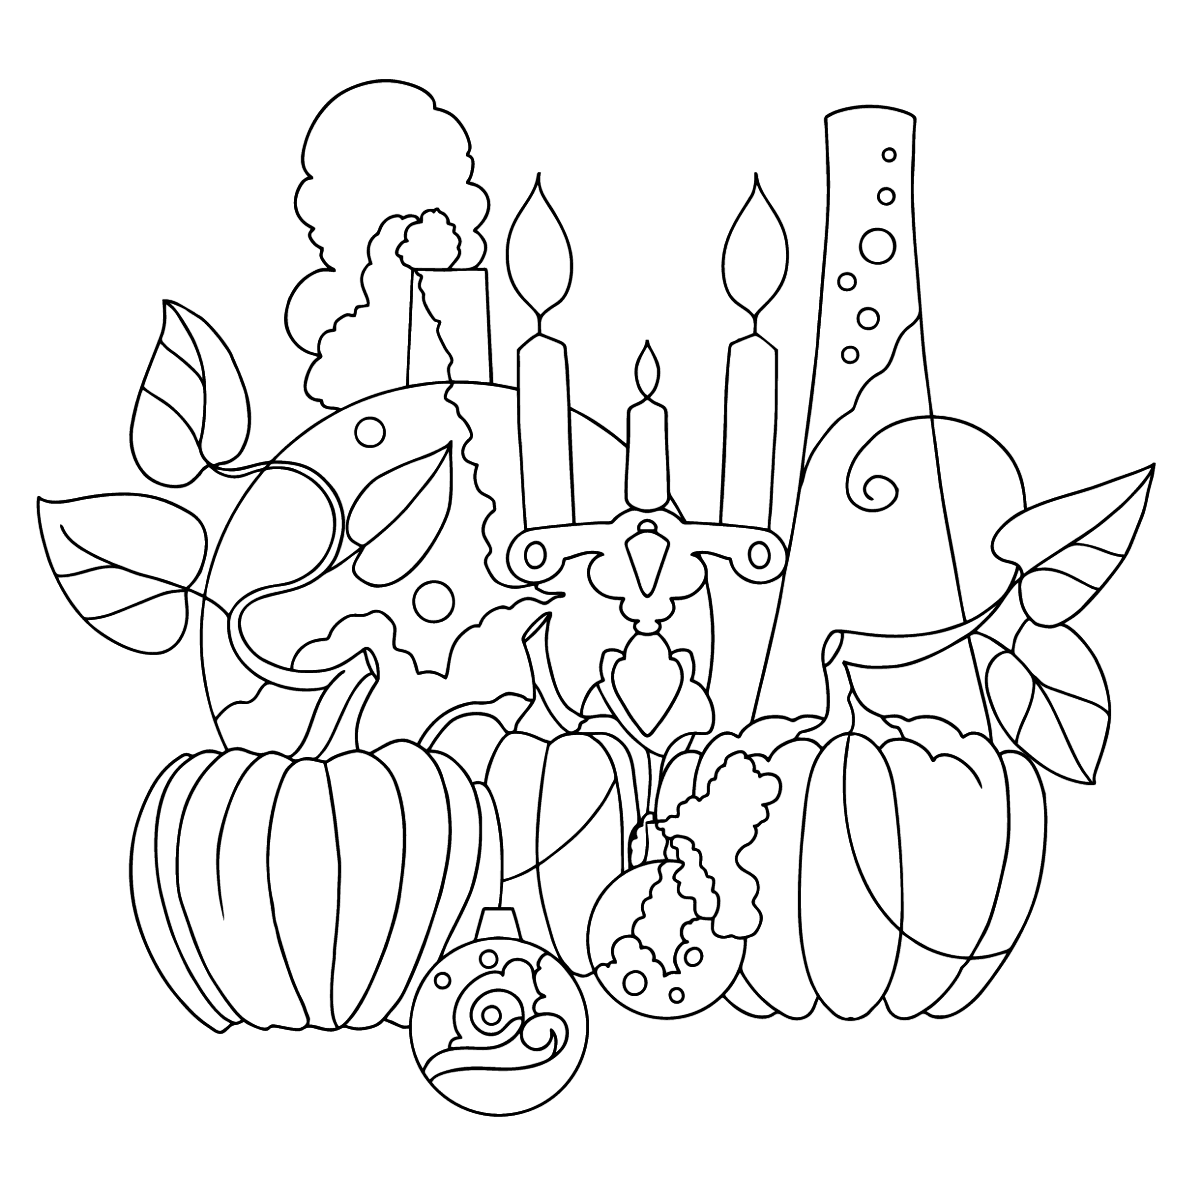 Magic Halloween - Halloween Coloring pages for Adults